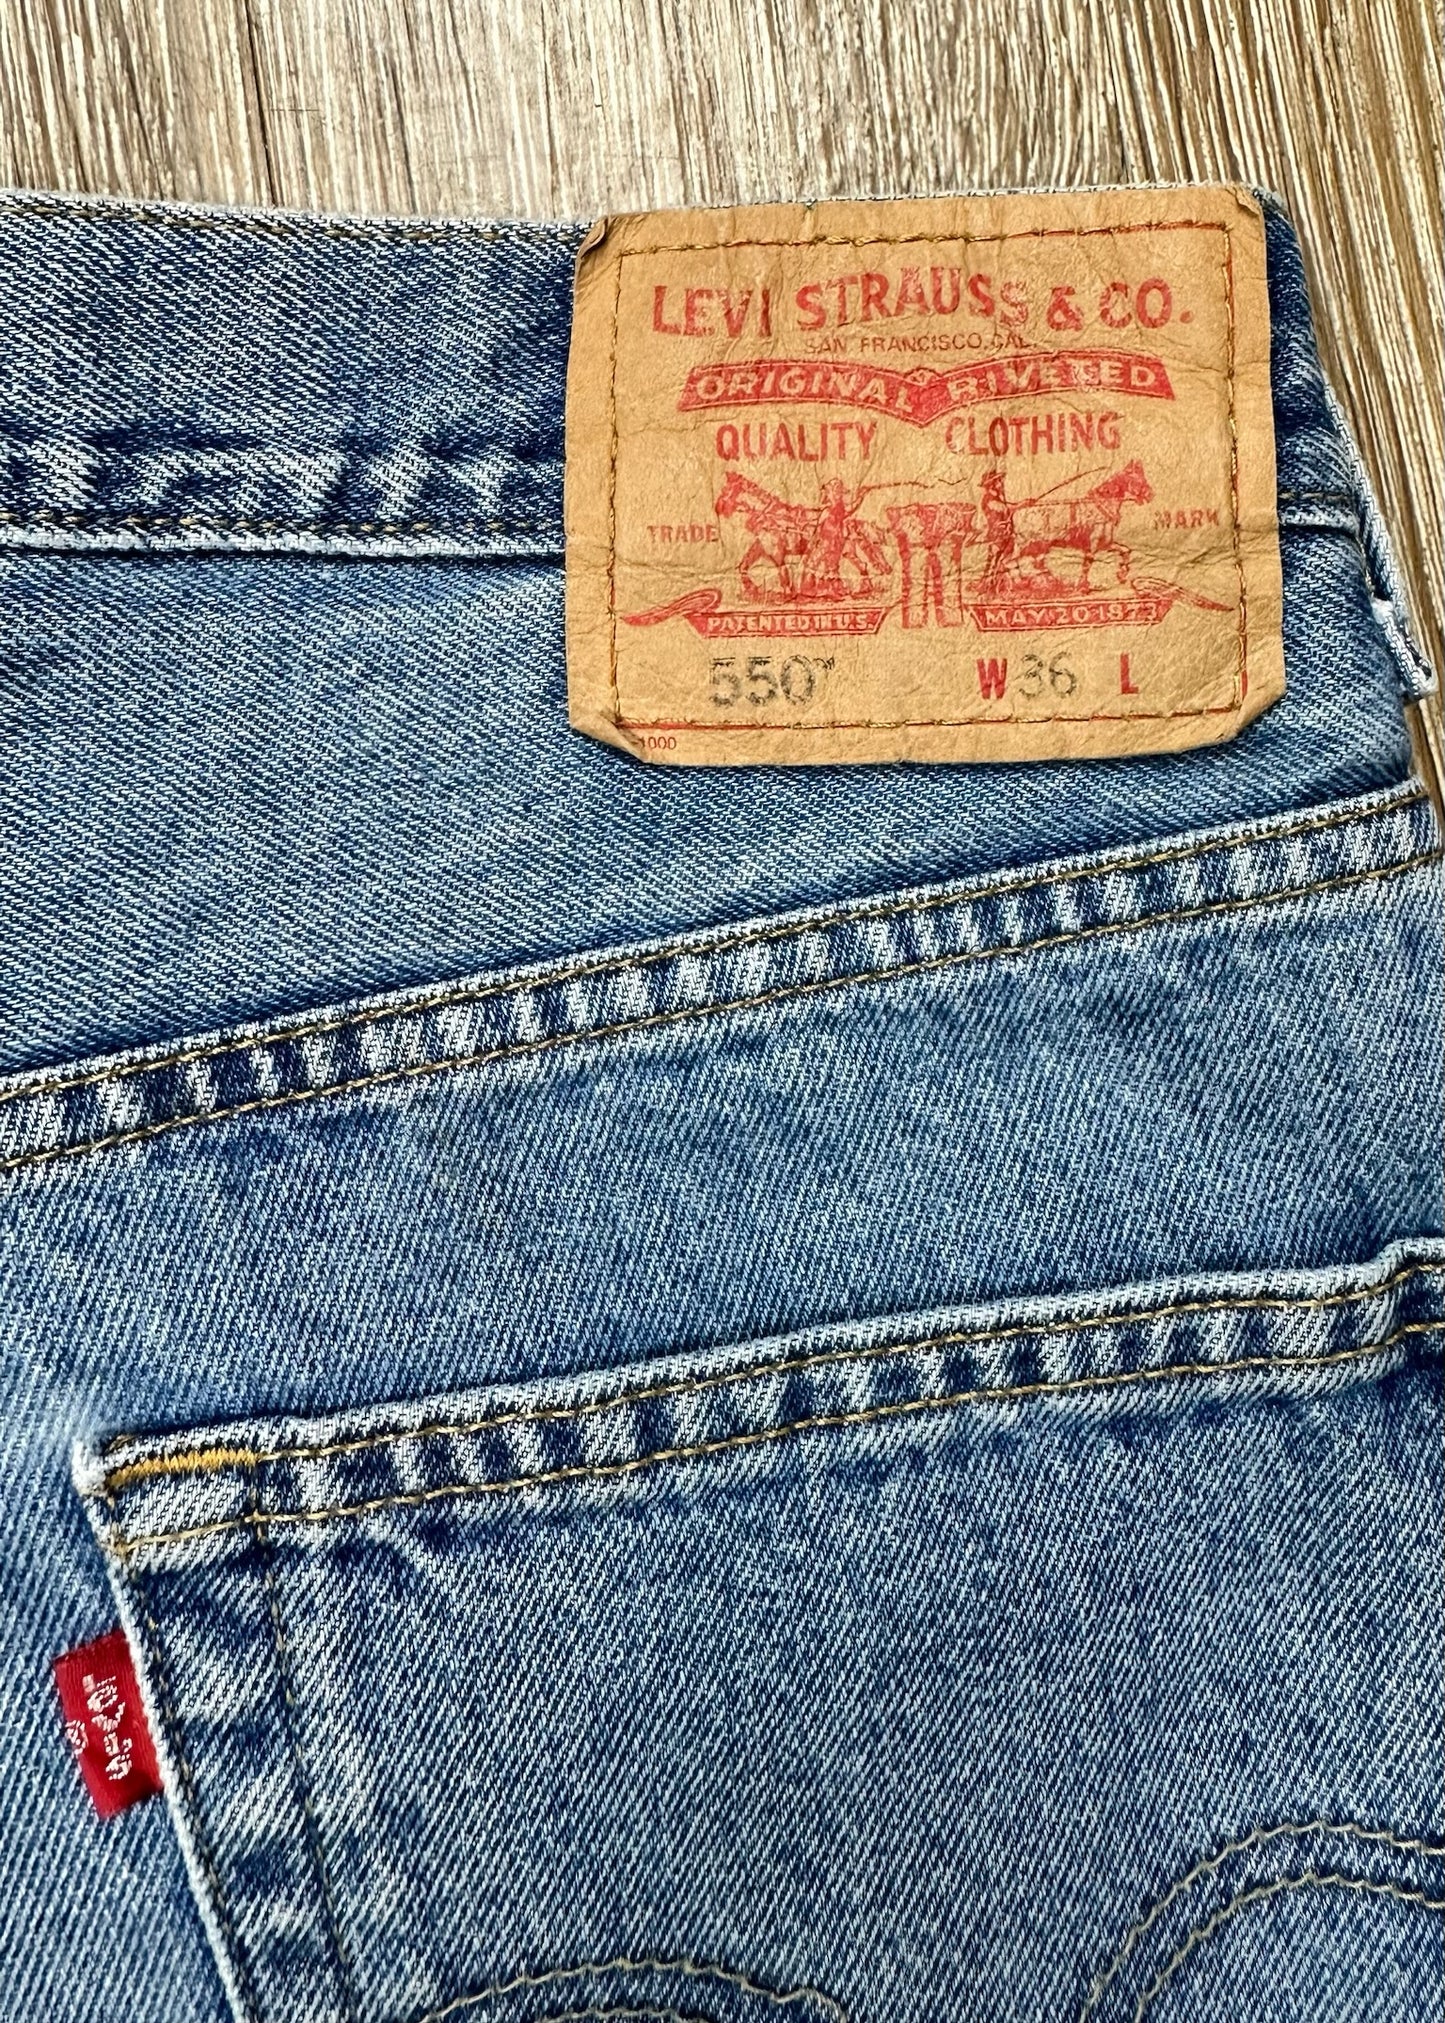 Levi’s 550 Vintage Relaxed Fit Denim Shorts